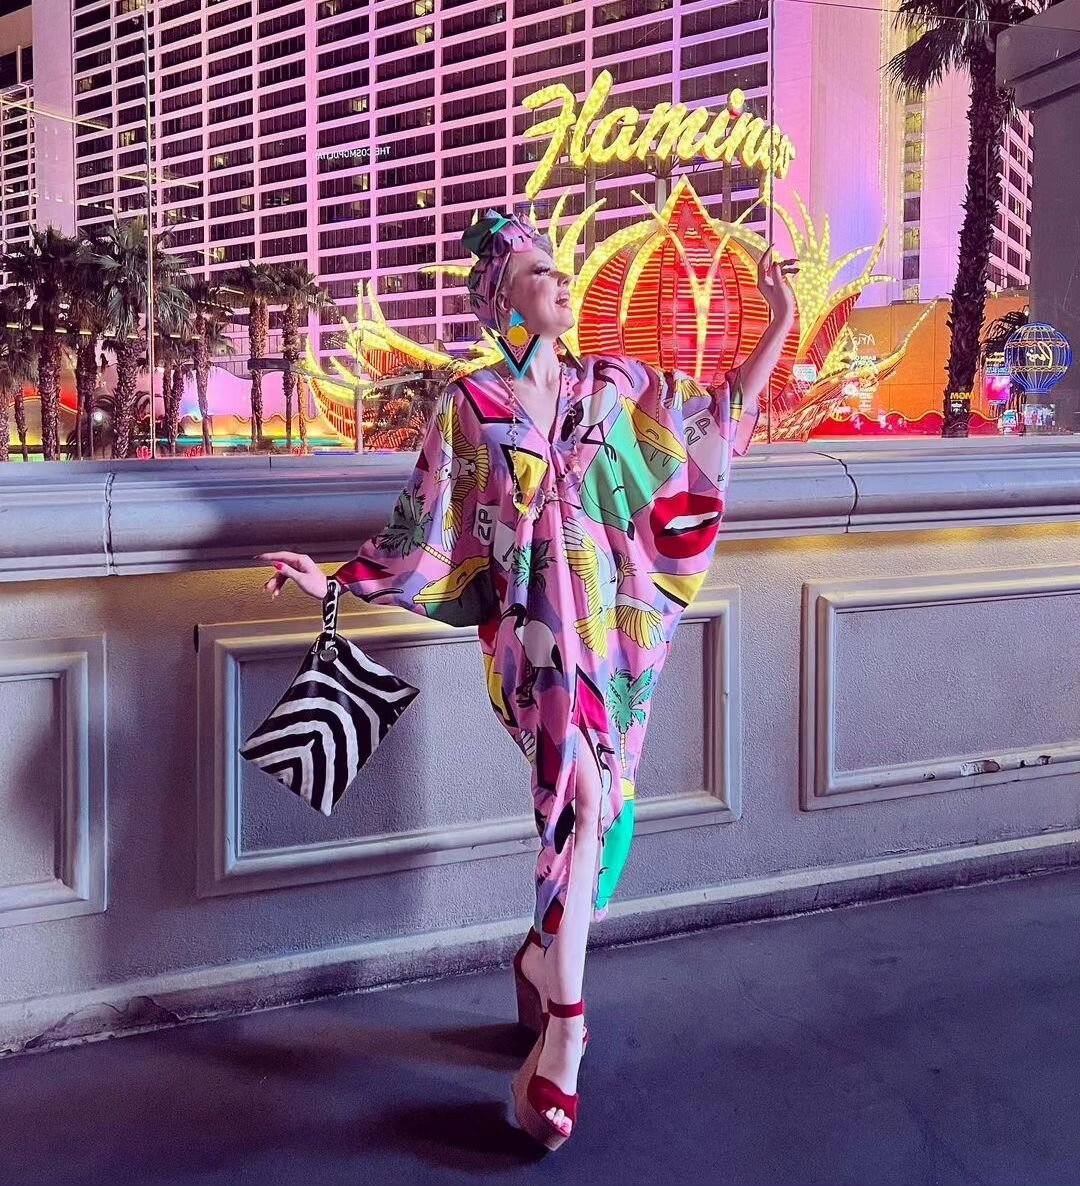 For the first time since I started designing under this pseudonym, the glorious @rubyslippers hath finally worn a full @fridalasvegas outfit in *actual* Las Vegas - at the iconic Flamingo no less!

Shop the 'Eleganza Australiana' Glamour Kaftan onlin